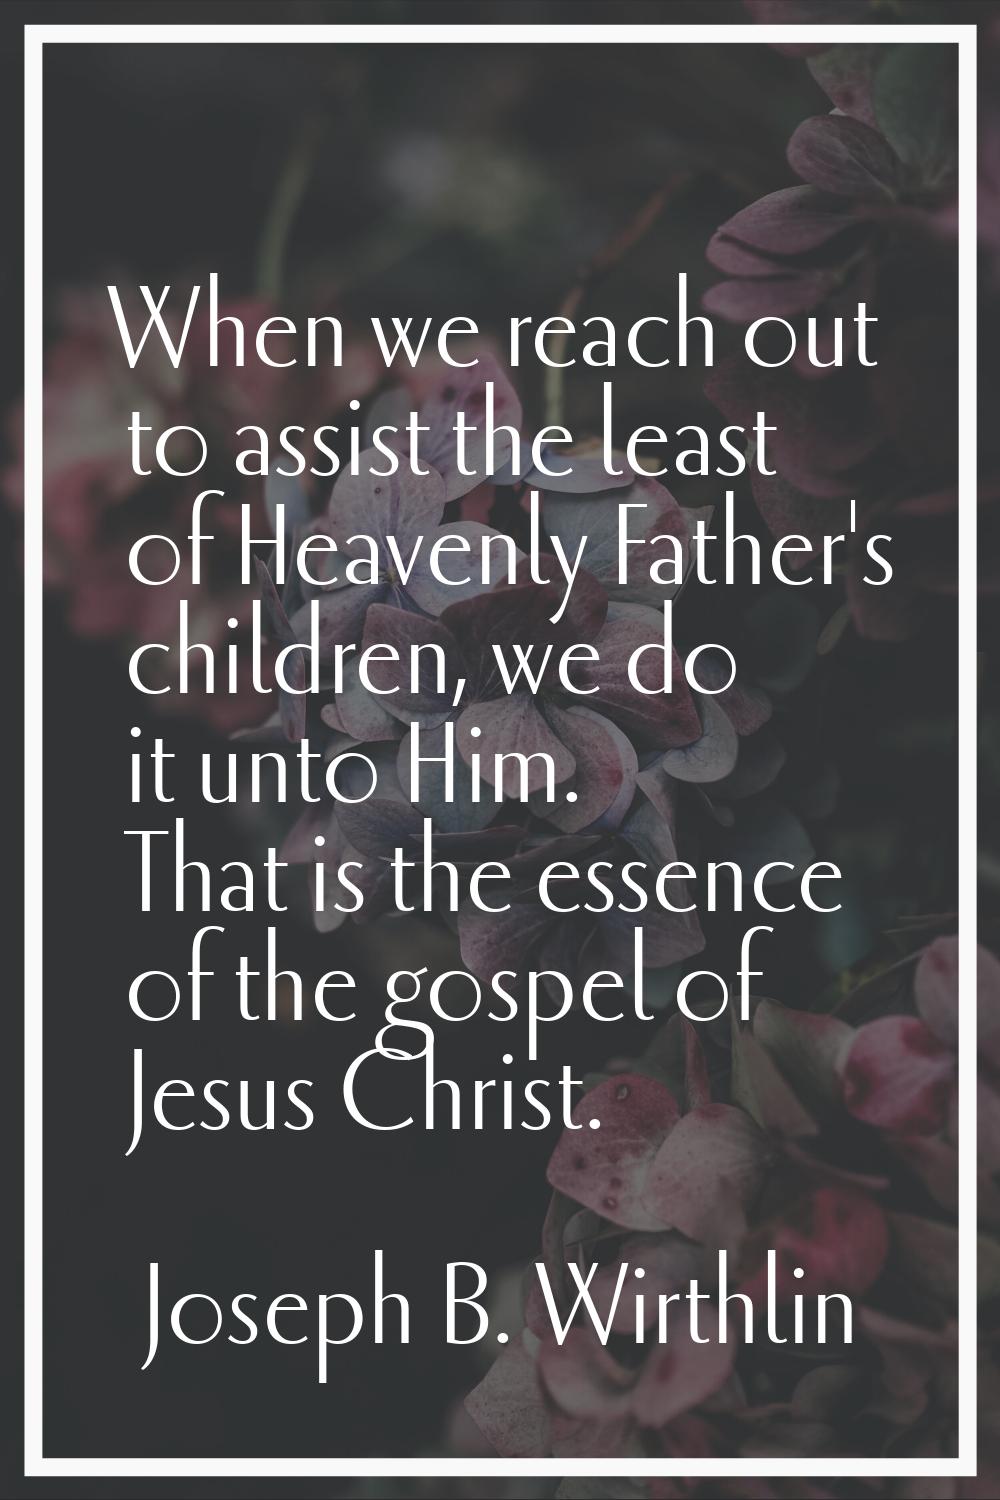 When we reach out to assist the least of Heavenly Father's children, we do it unto Him. That is the